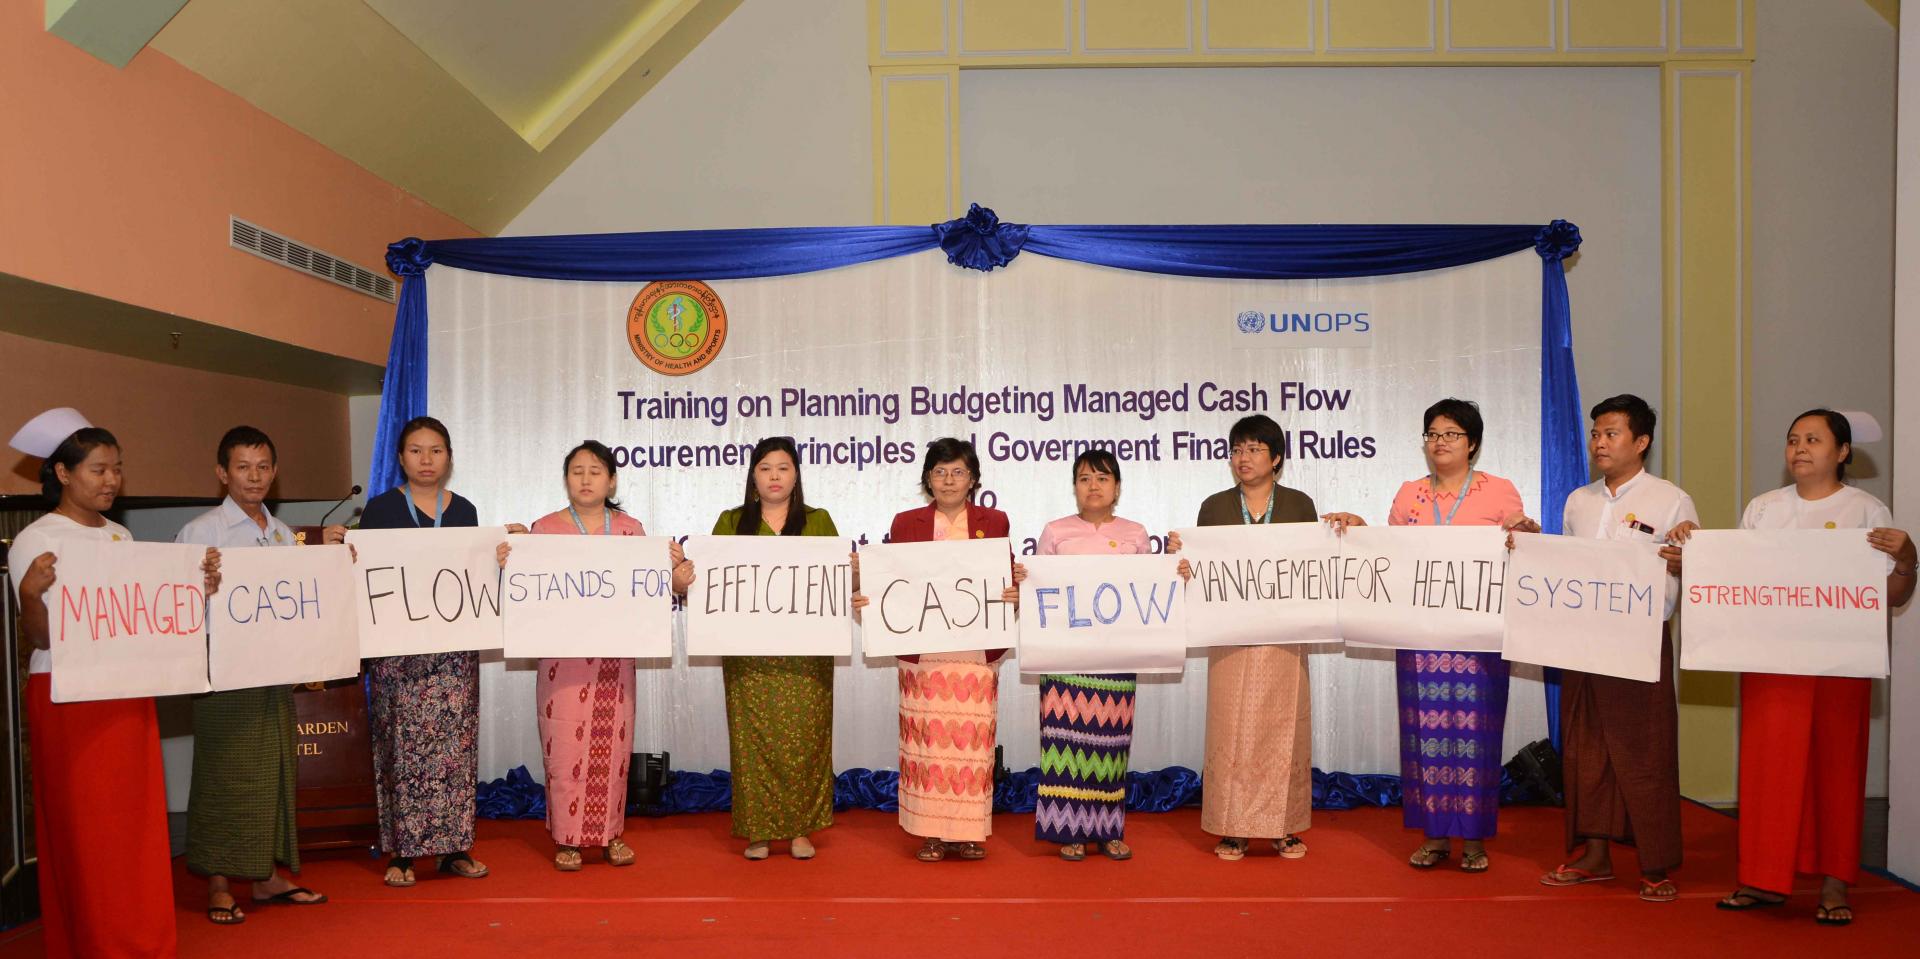 MOHS Yangon Regional Deputy Director (Disease Control) Dr Khin Nan Lon, together with participating government health staff and UNOPS-PR staff, promoting effective and efficient cash flow management for health system strengthening in Myanmar. Photo: UNOPS